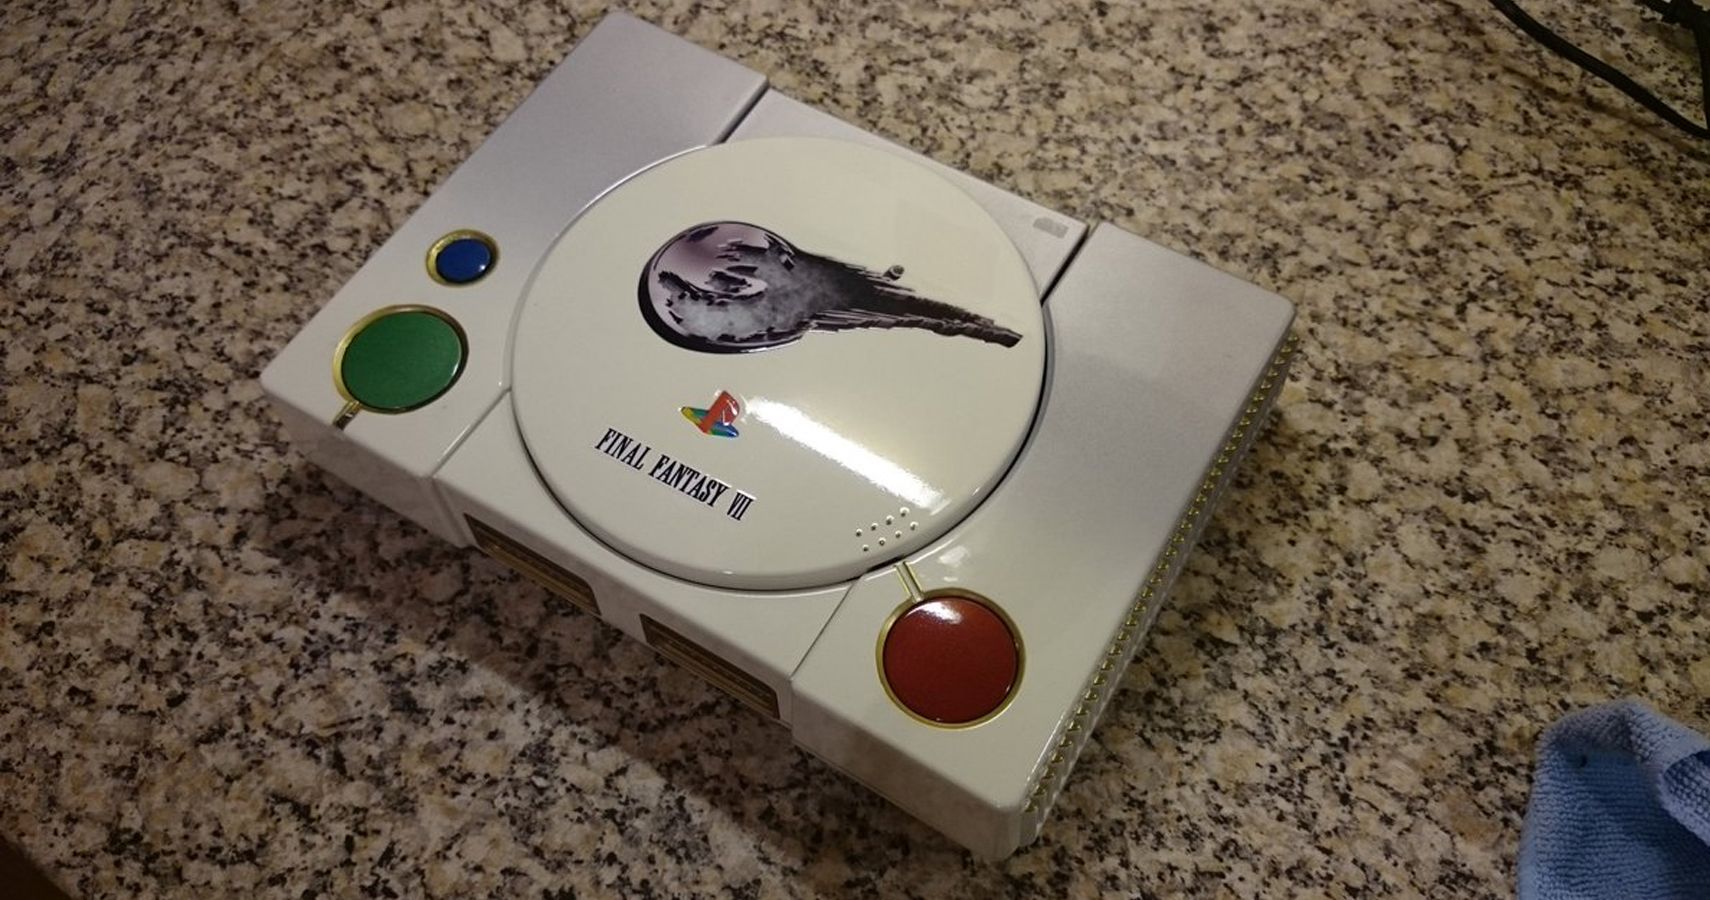 20 Incredible Custom PlayStation Consoles (And 10 That Should Never Have Been Made)